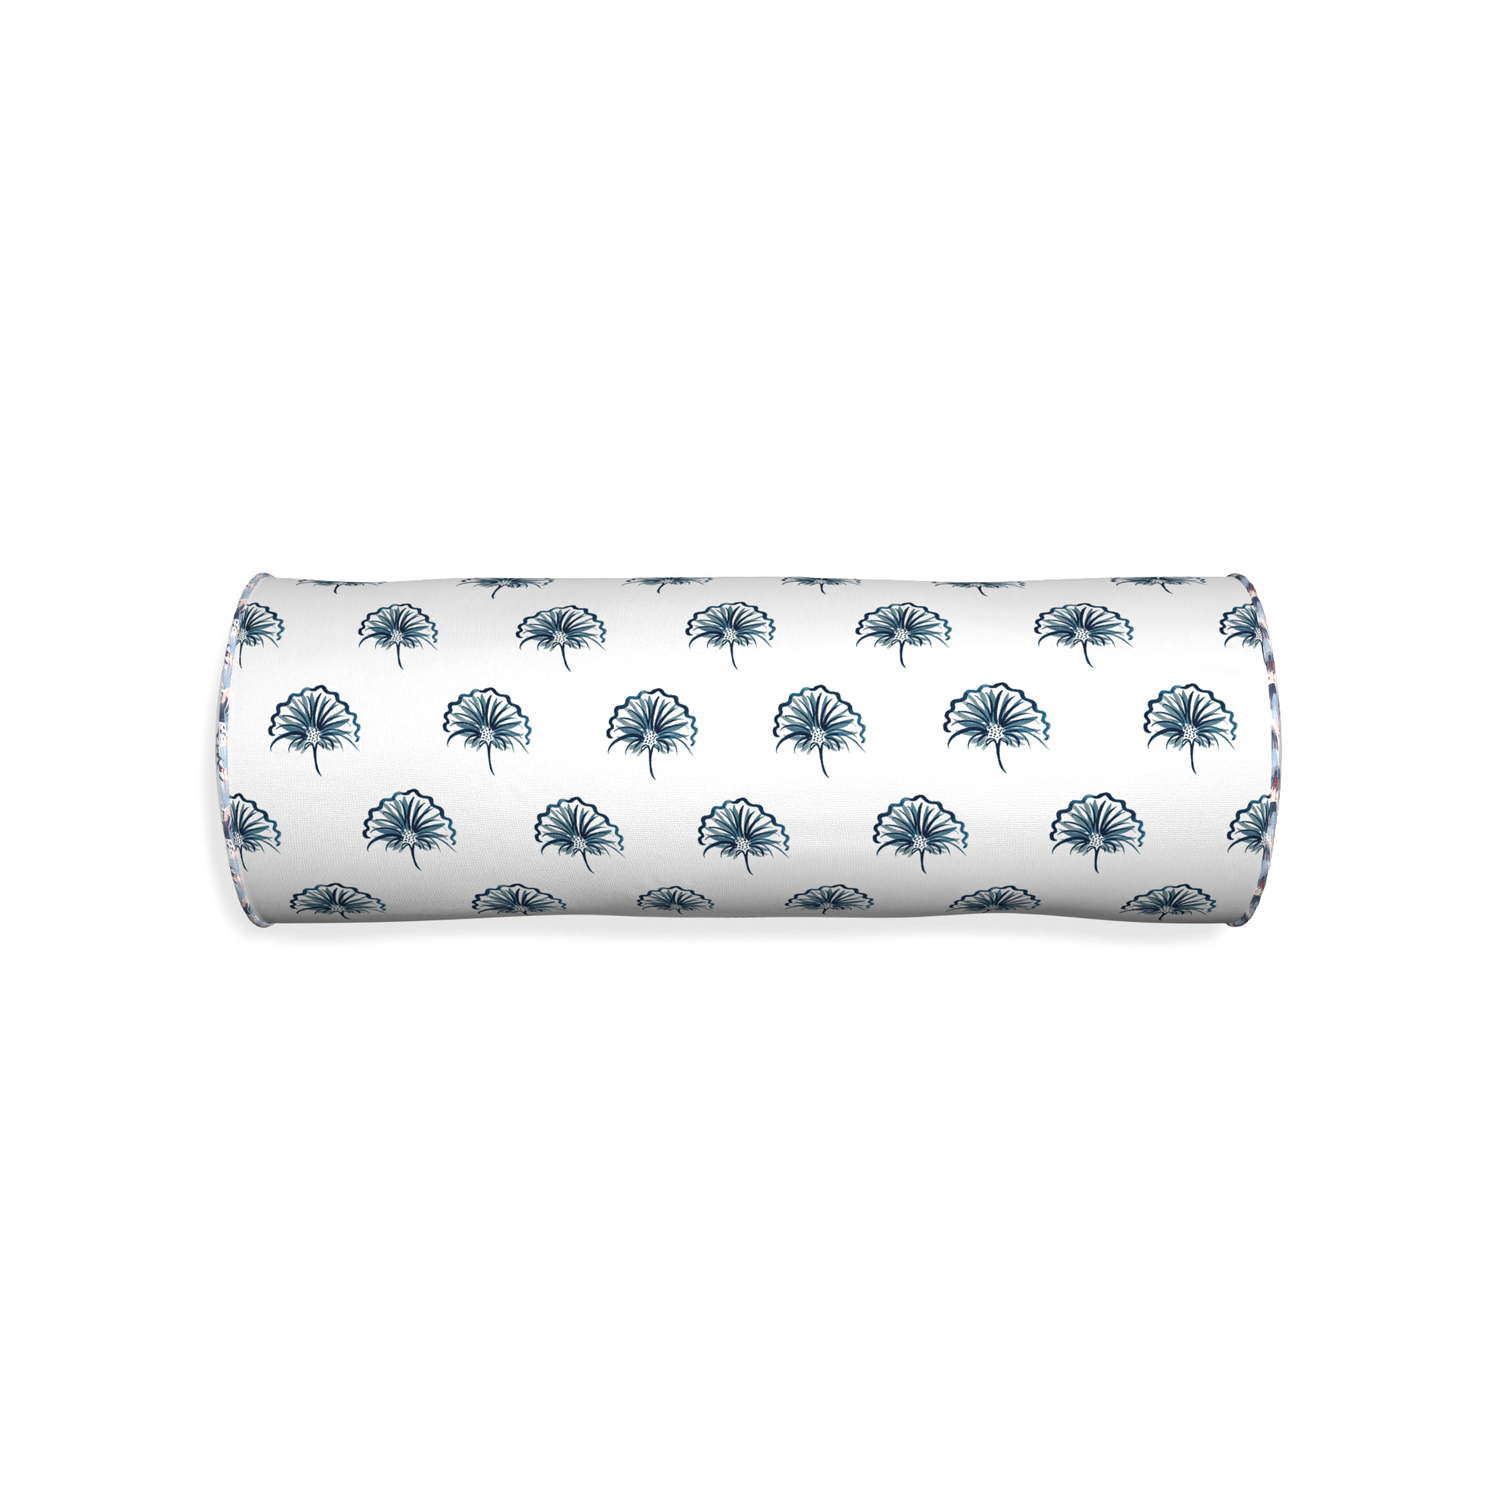 Bolster penelope midnight custom floral navypillow with e piping on white background